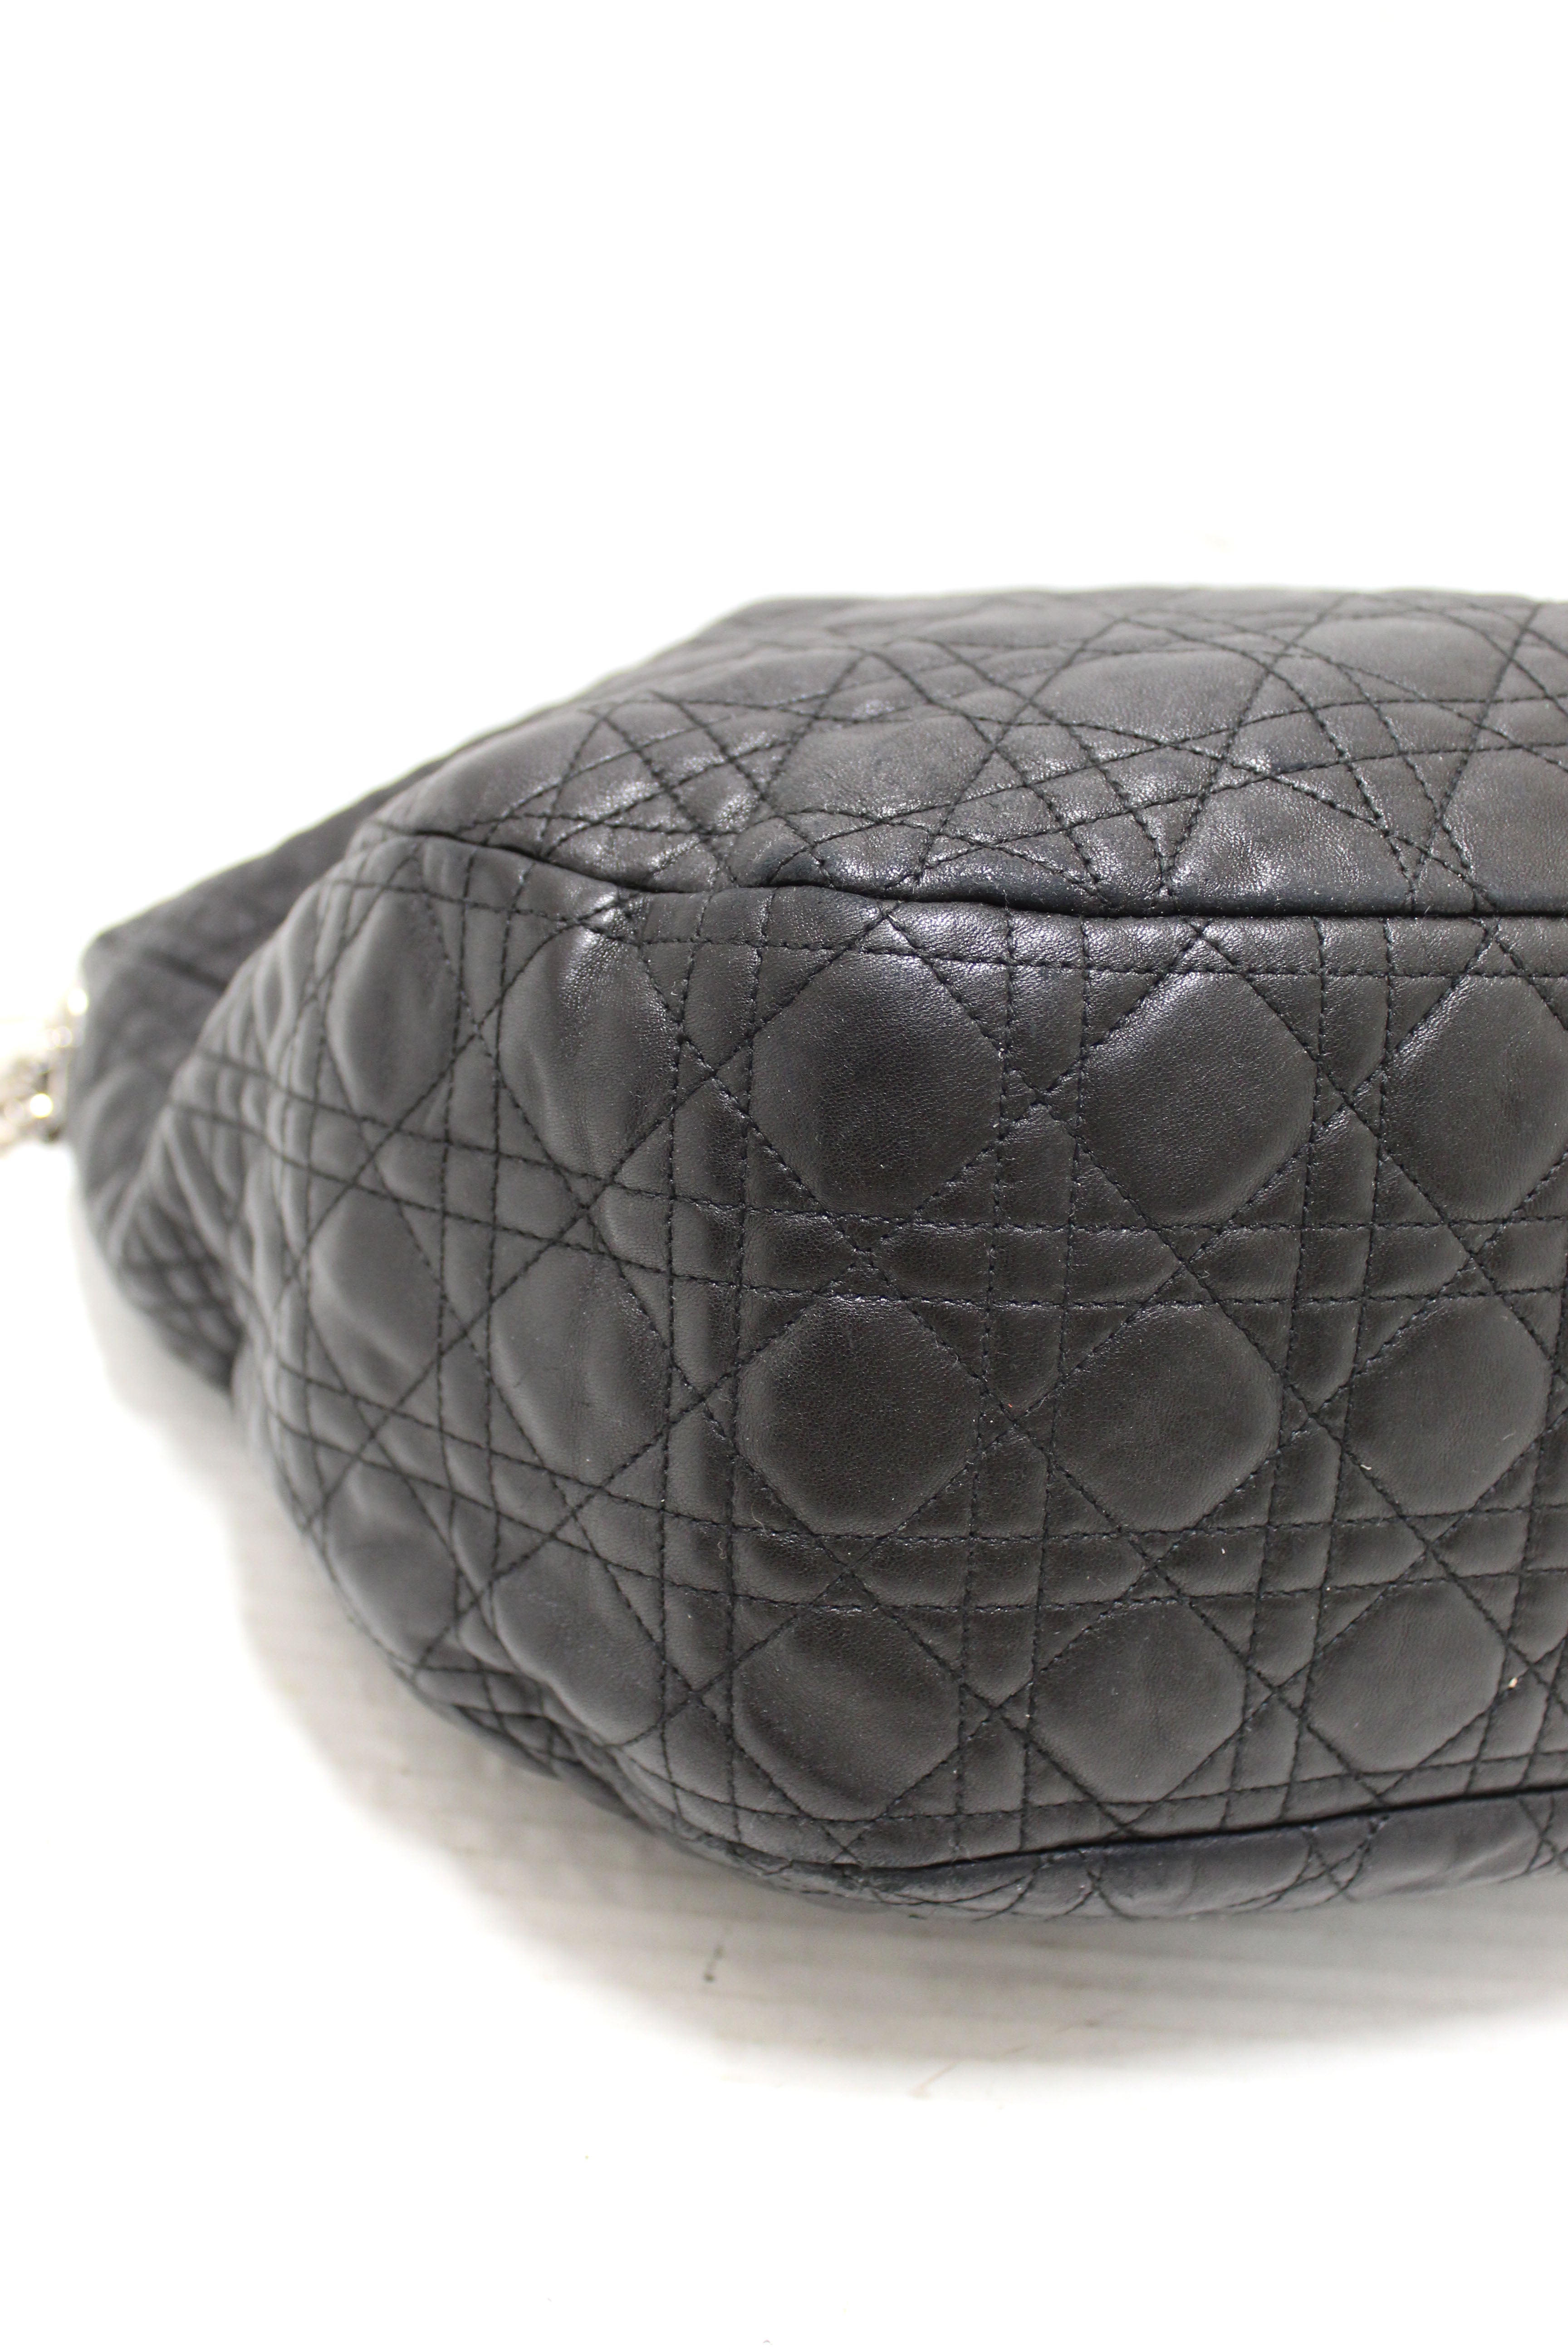 Authentic Christian Dior Black Lady Dior Cannage Quilted Lambskin Soft Medium Hobo Bag